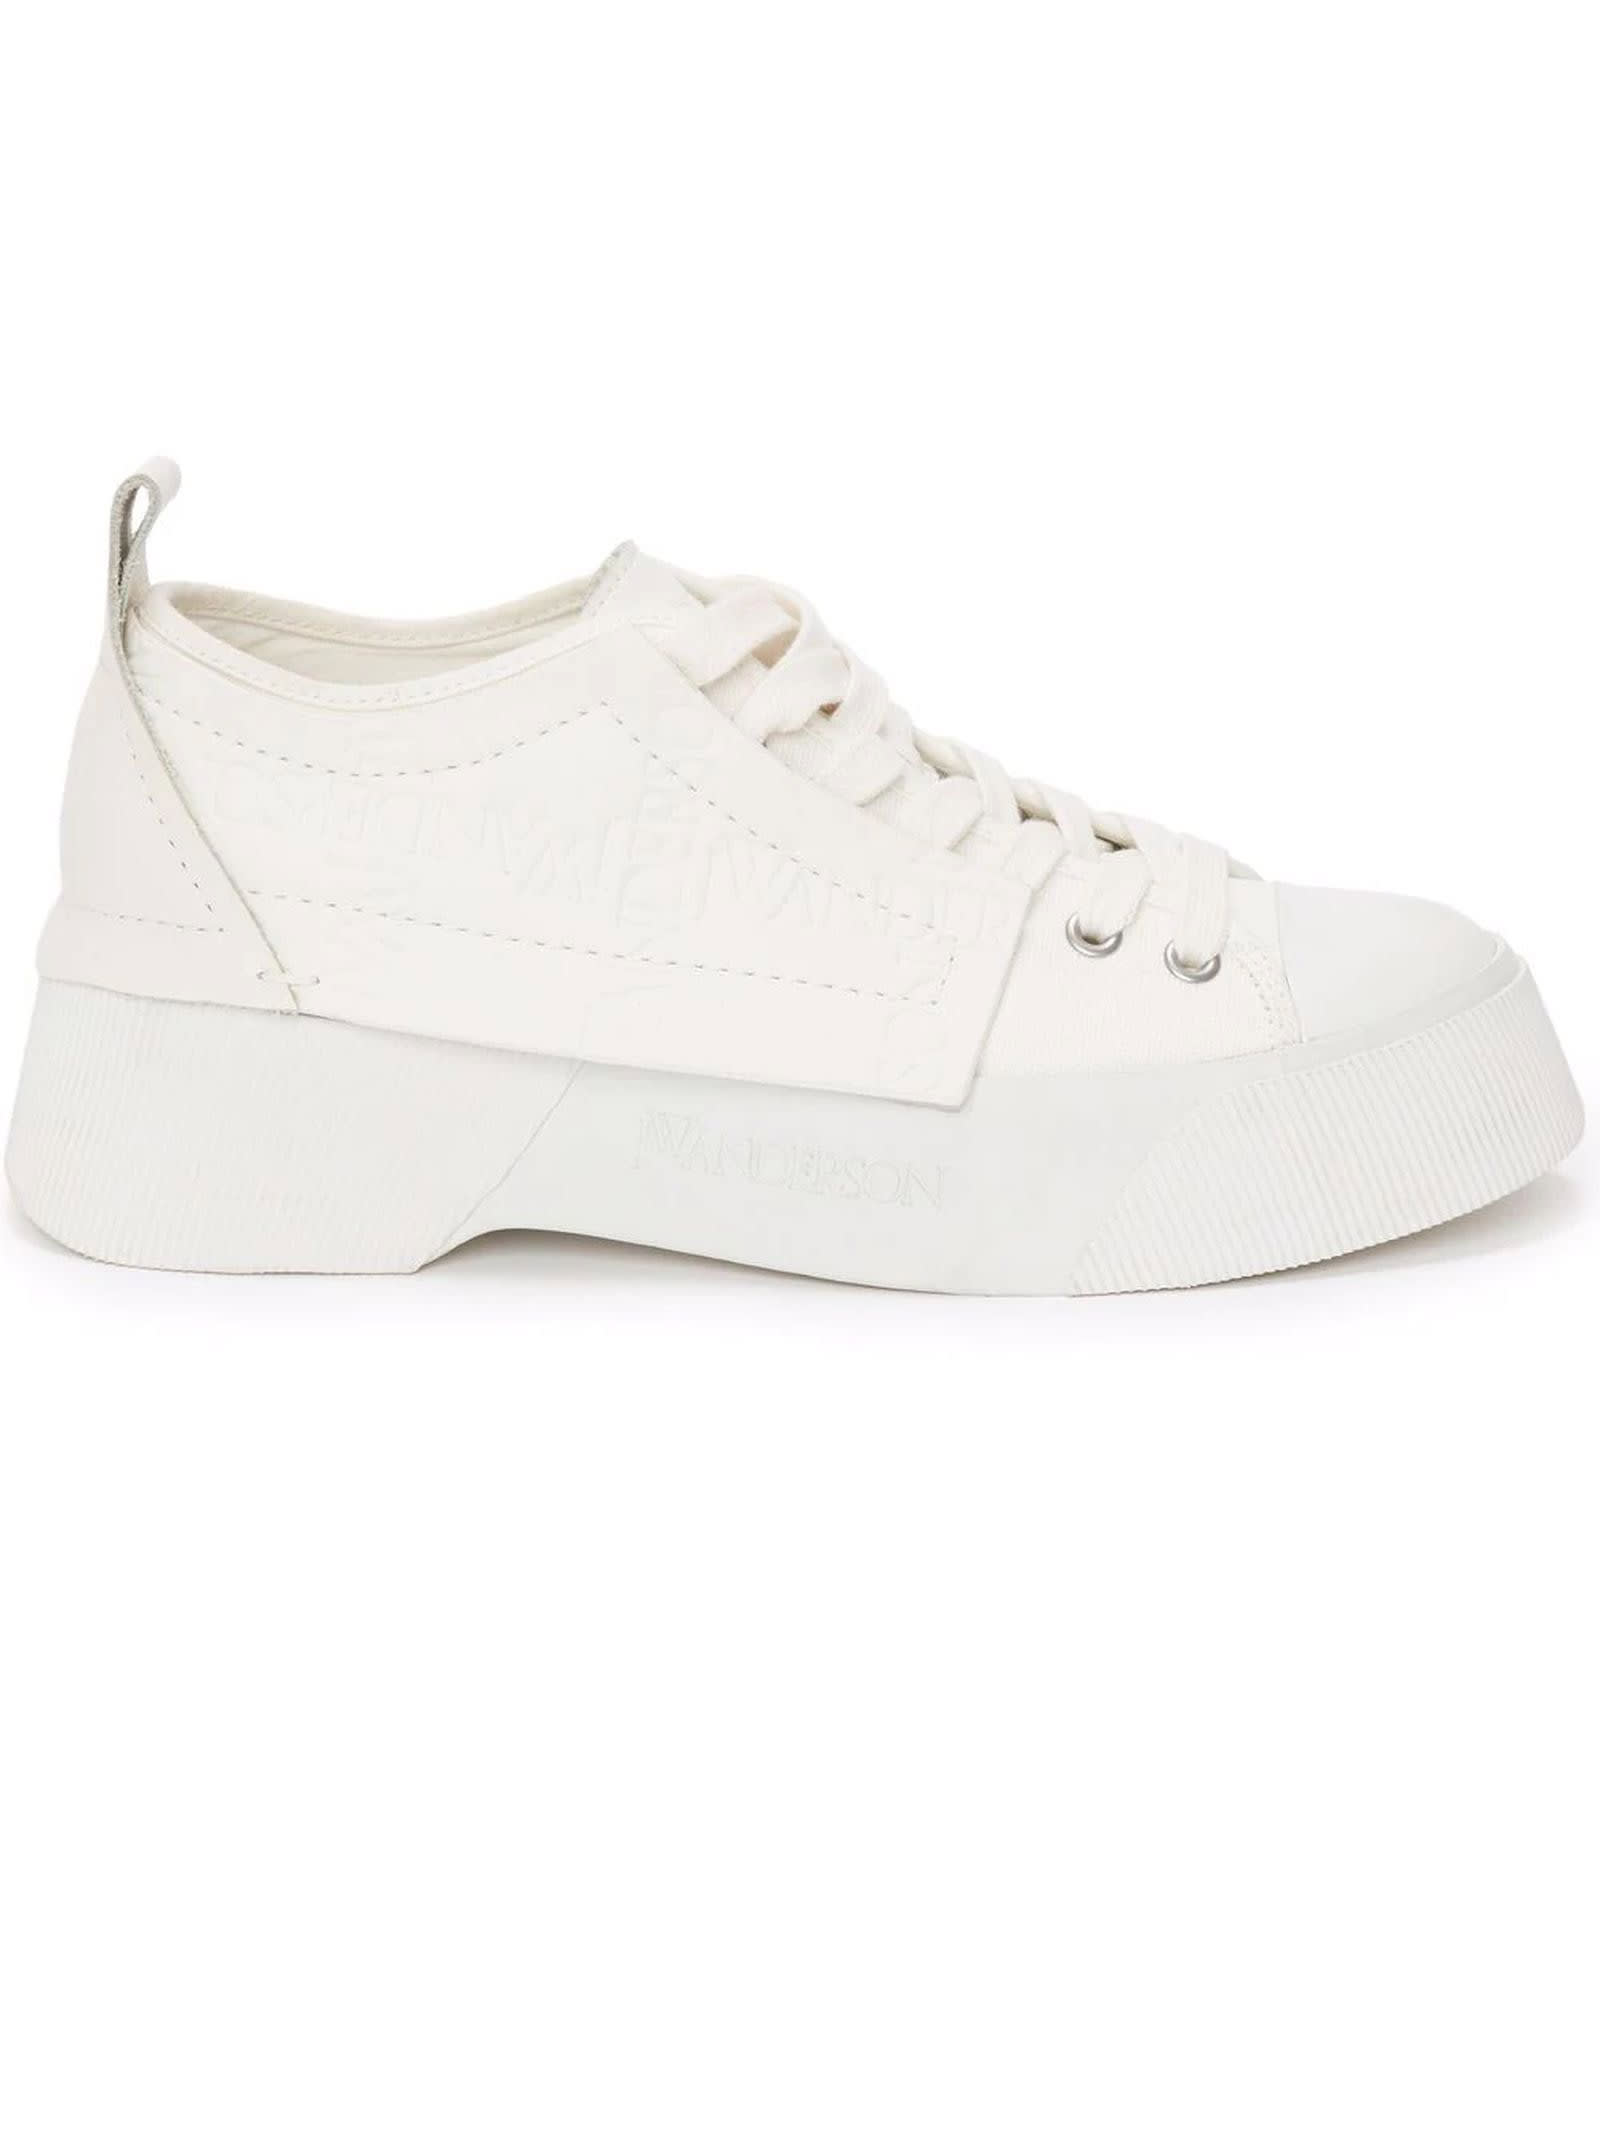 J.W. Anderson White Low Sneakers